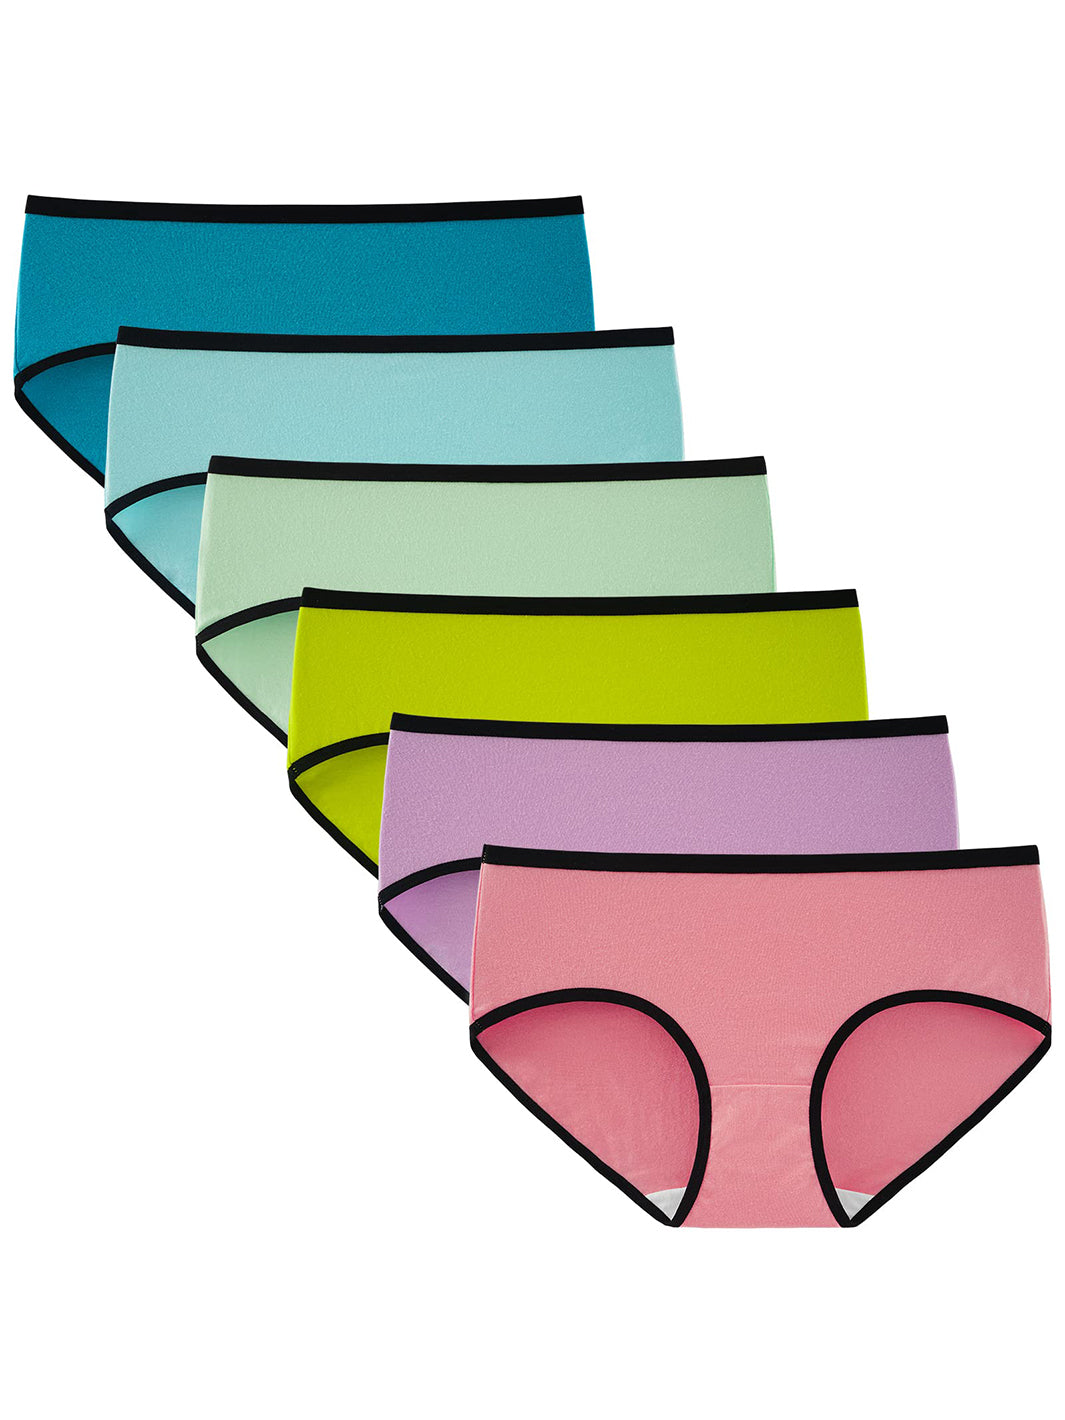 INNERSY Girls Panties Cotton Underwear for Teens Pack of 6 (L(12-14 yrs),  Colorful Hem)